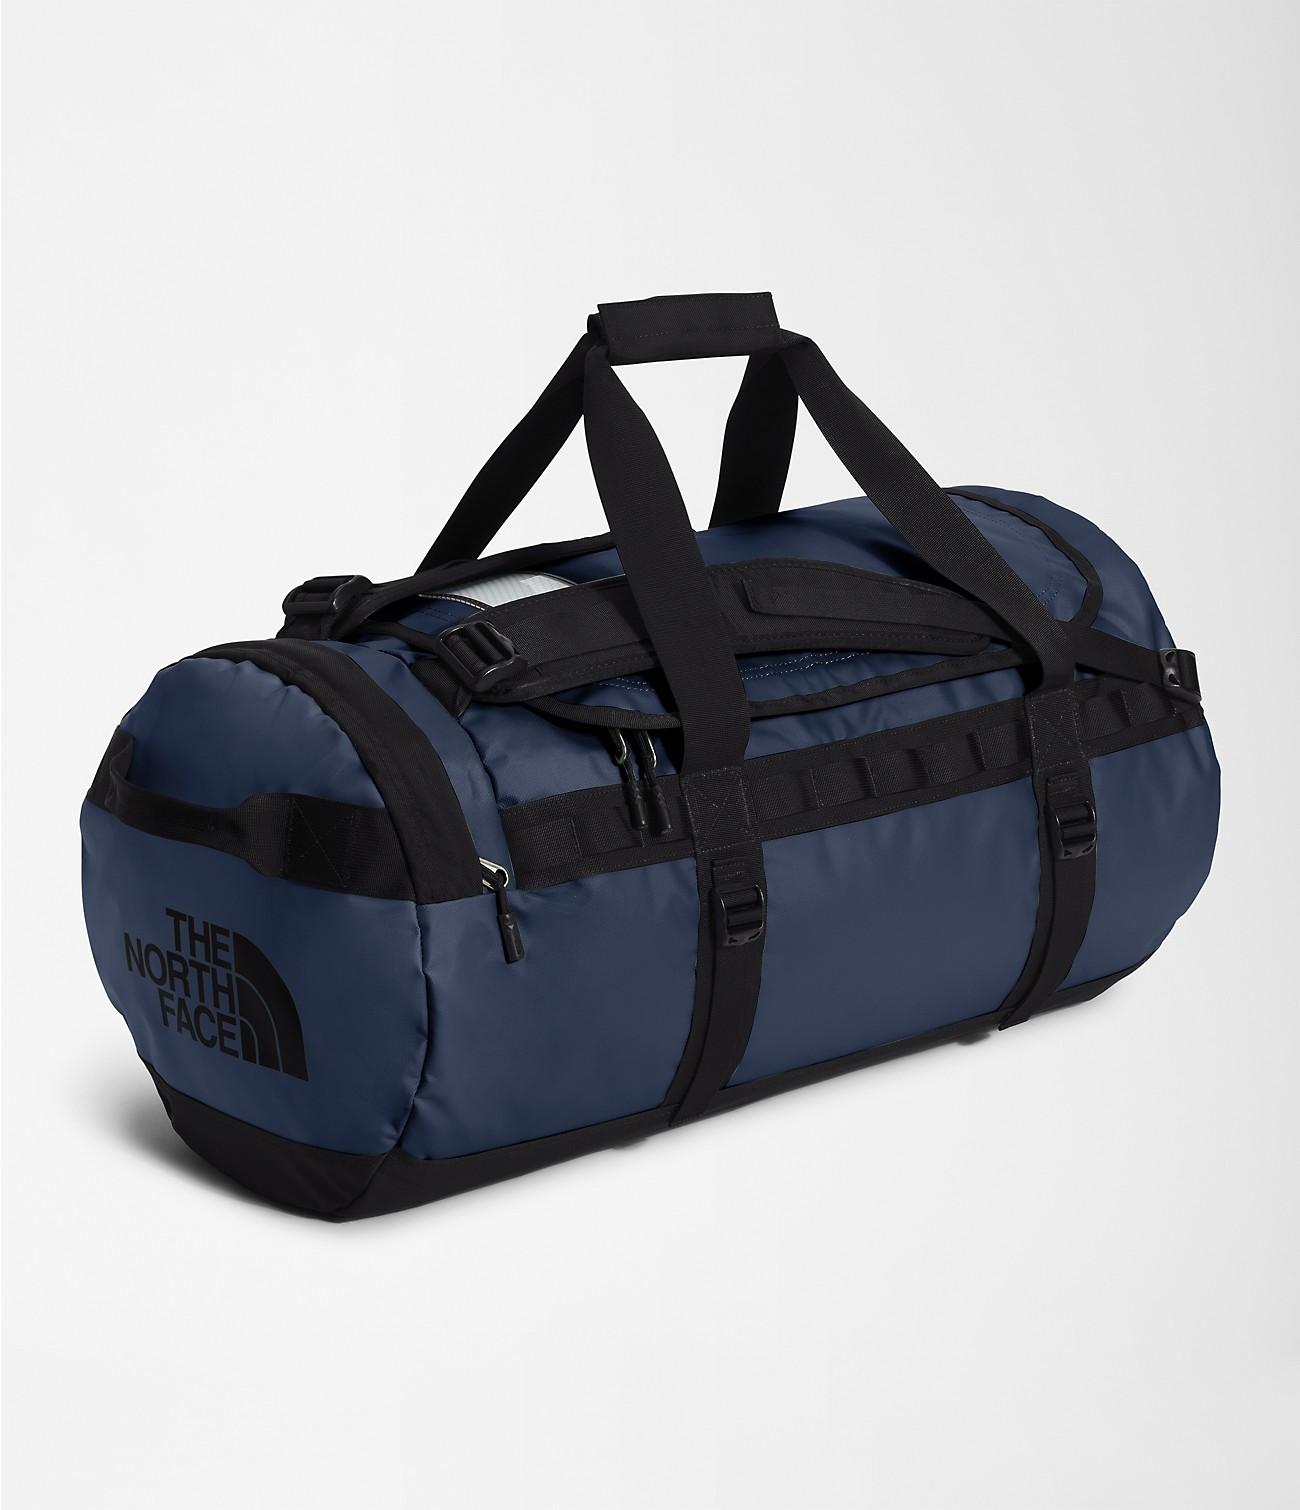 Unlock Wilderness' choice in the Deuter Vs North Face comparison, the Base Camp Duffel by The North Face